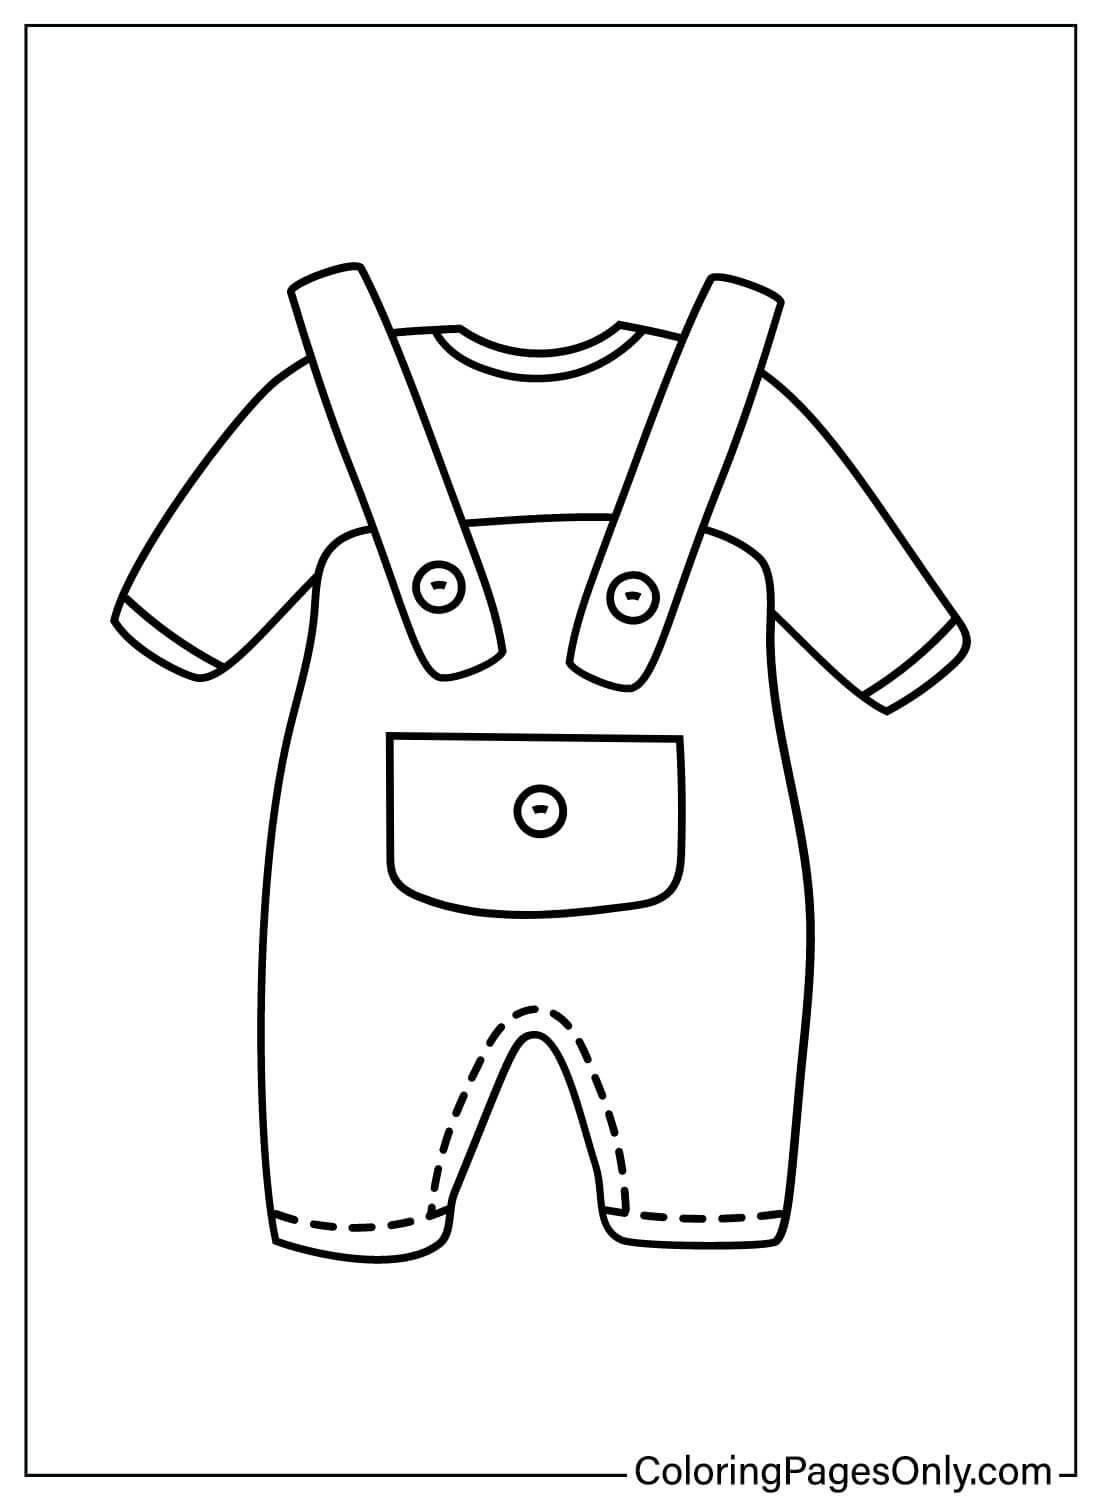 Baby Clothes Coloring Page For Children from Baby Clothes